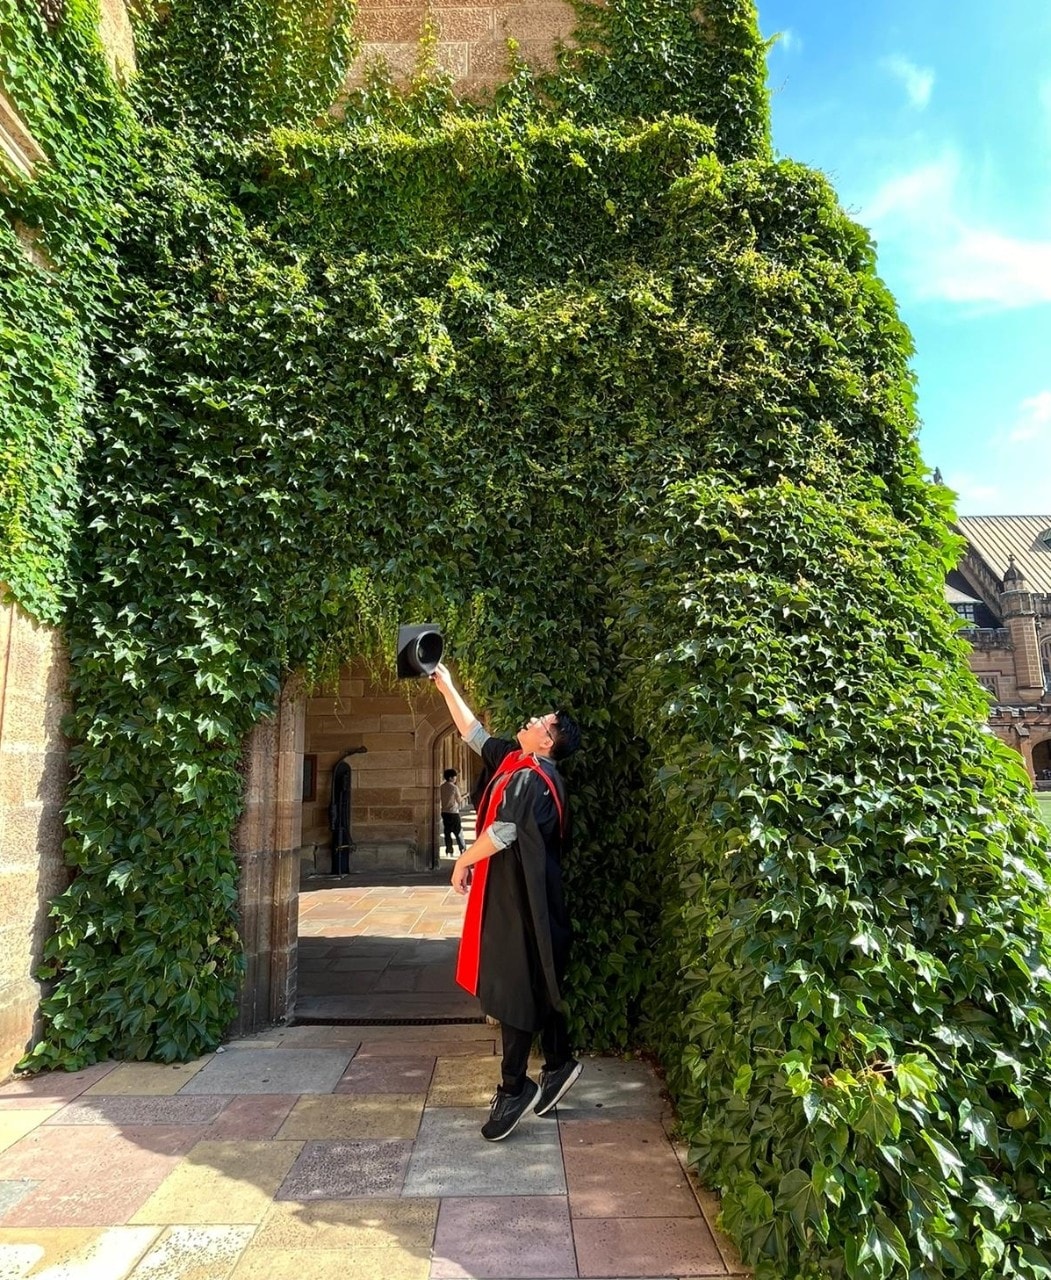 Dr Chieh-Ming Lai throwing doctoral tam into the air on graduation day at University of Sydney